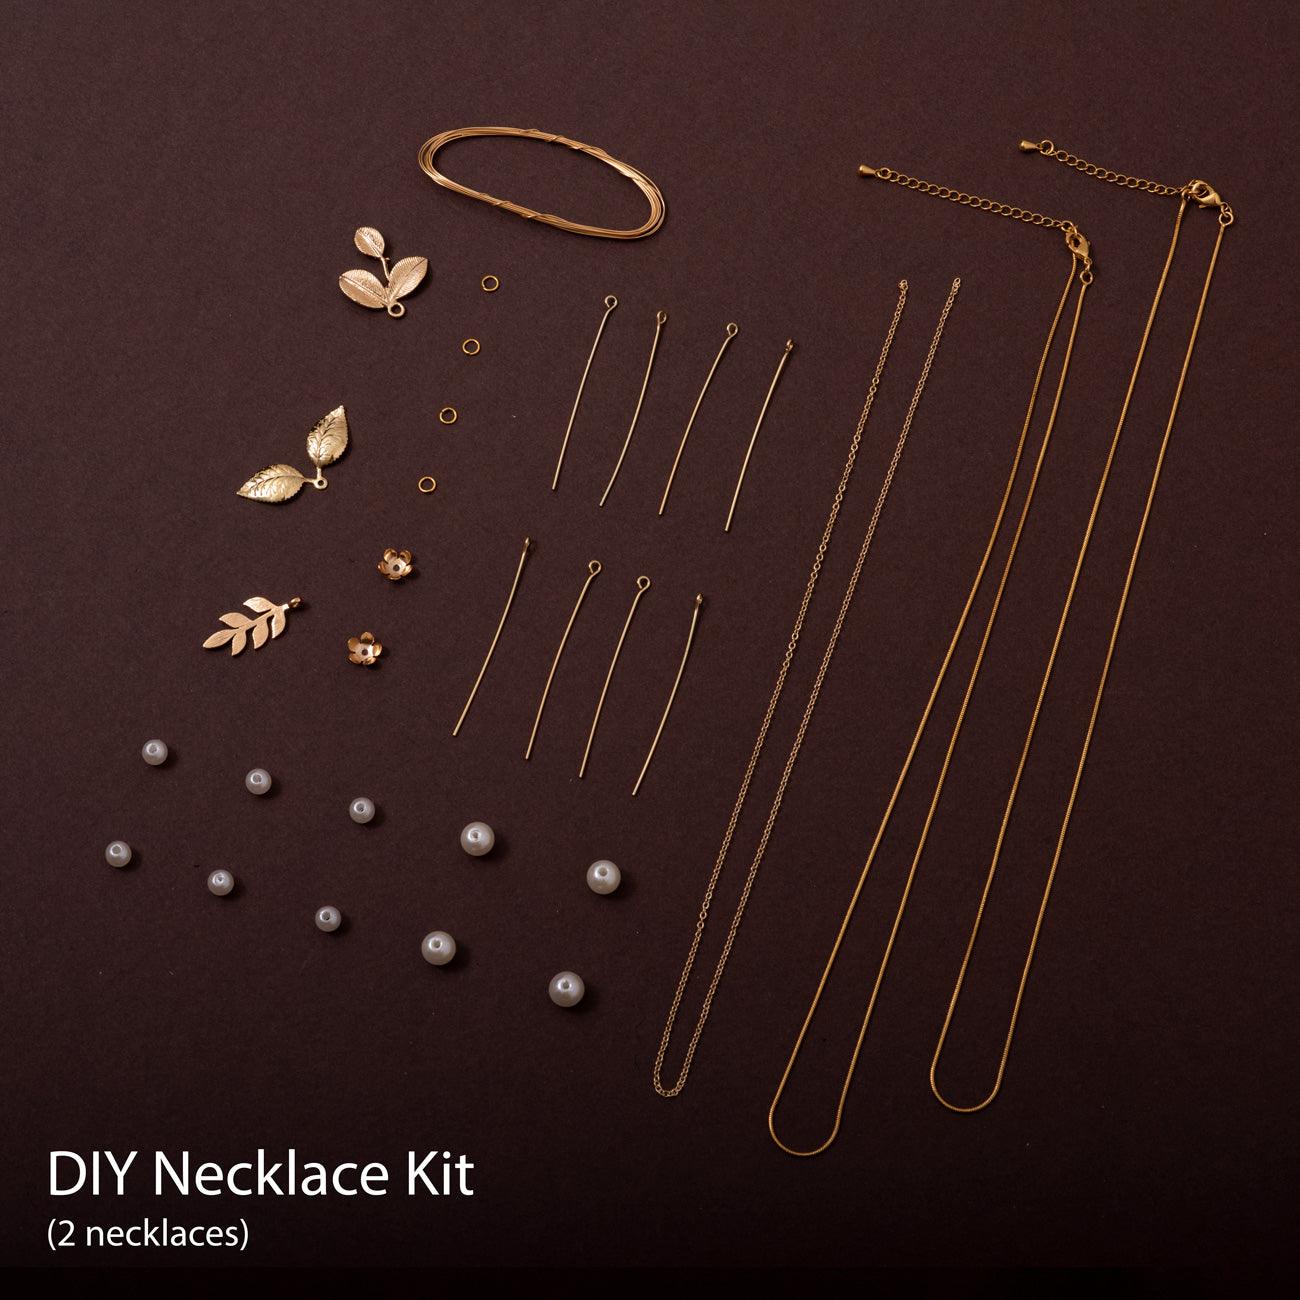 DIY Jewelry Earrings & Necklace Kit - Designed by Upcycle with Jing Available to Buy at a Discounted Price on Moon Behind The Hill Online Designer Discount Store